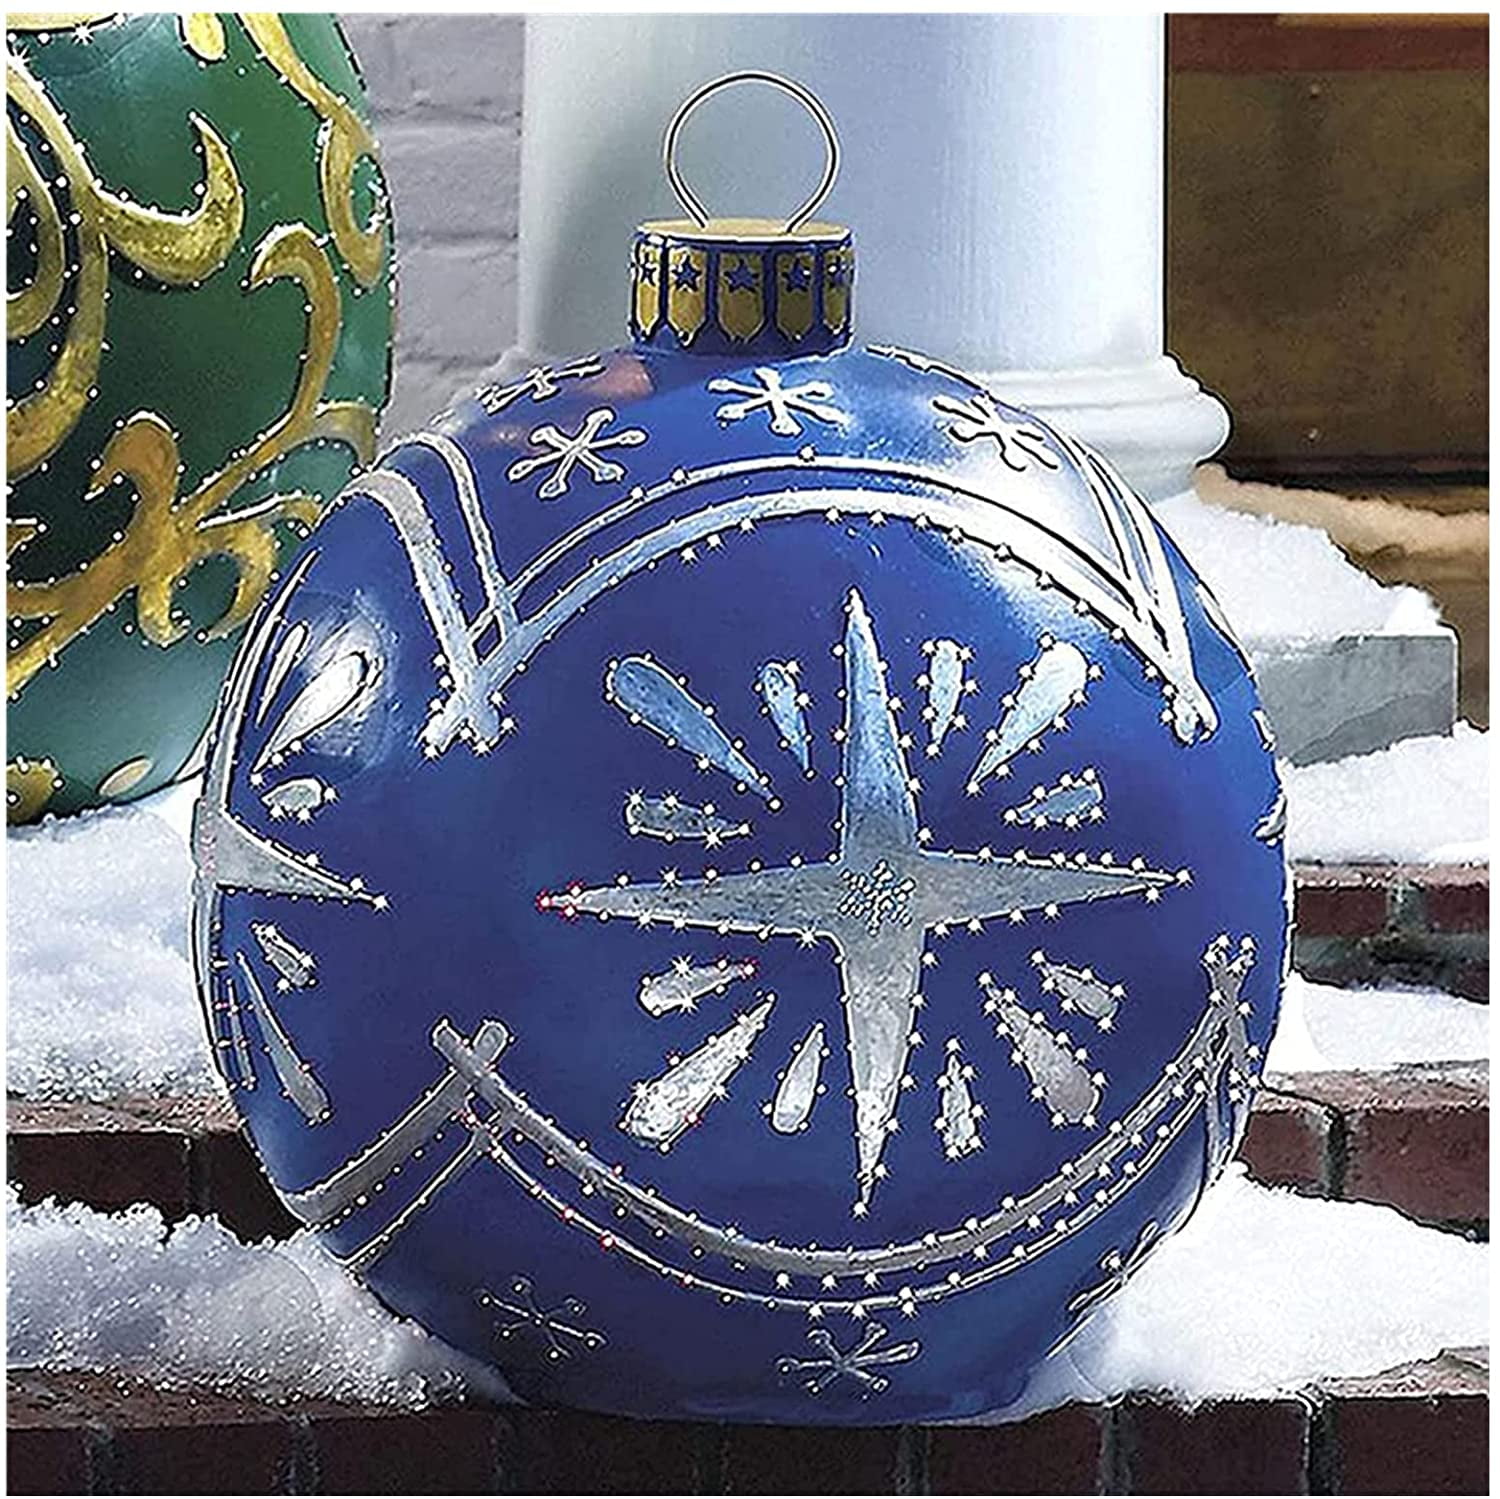 Christmas Inflatables Outdoor Decorations Balls, 24 Inch Giant ...